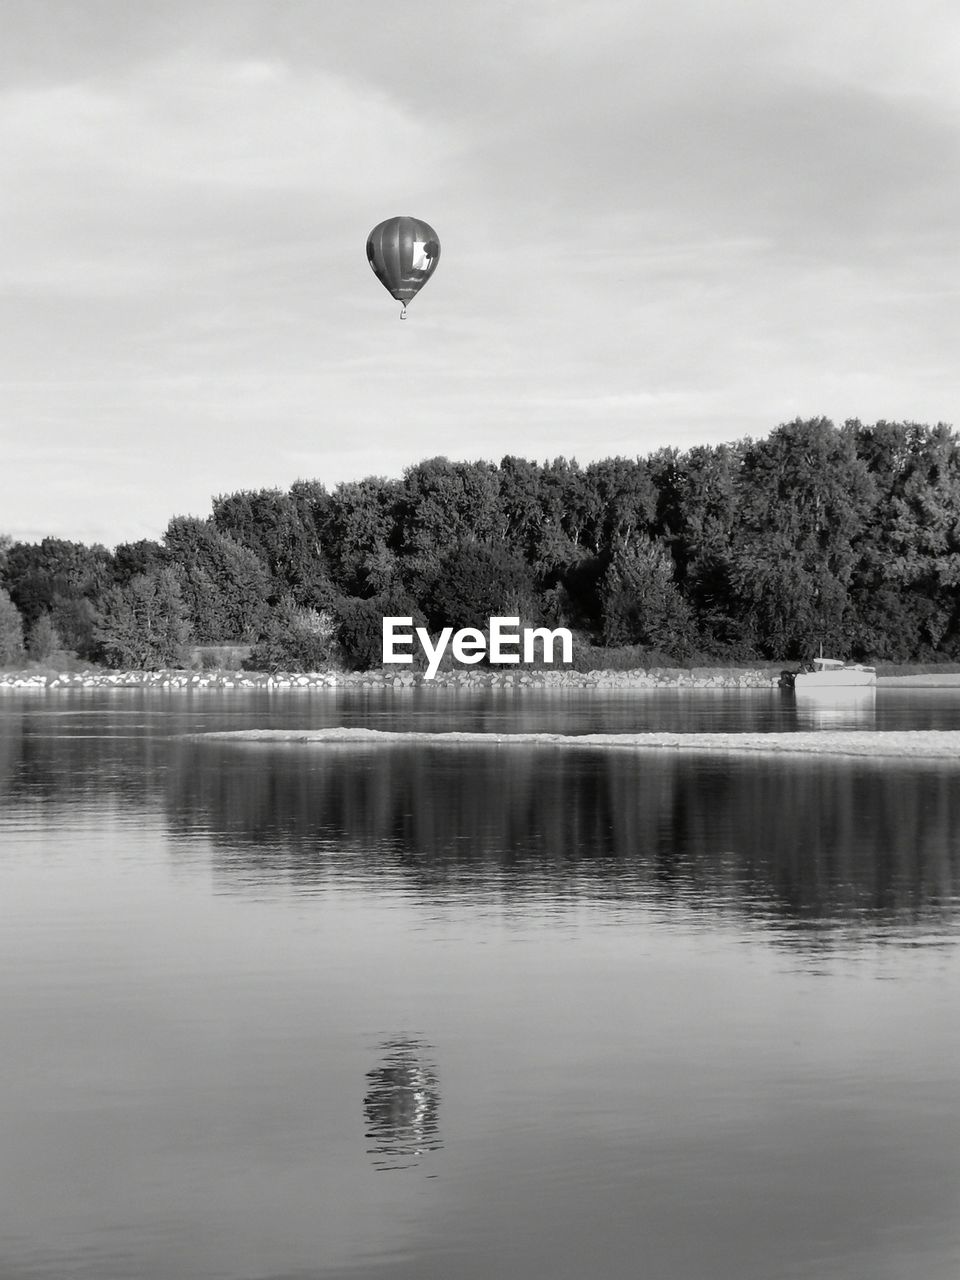 VIEW OF HOT AIR BALLOON IN LAKE AGAINST SKY